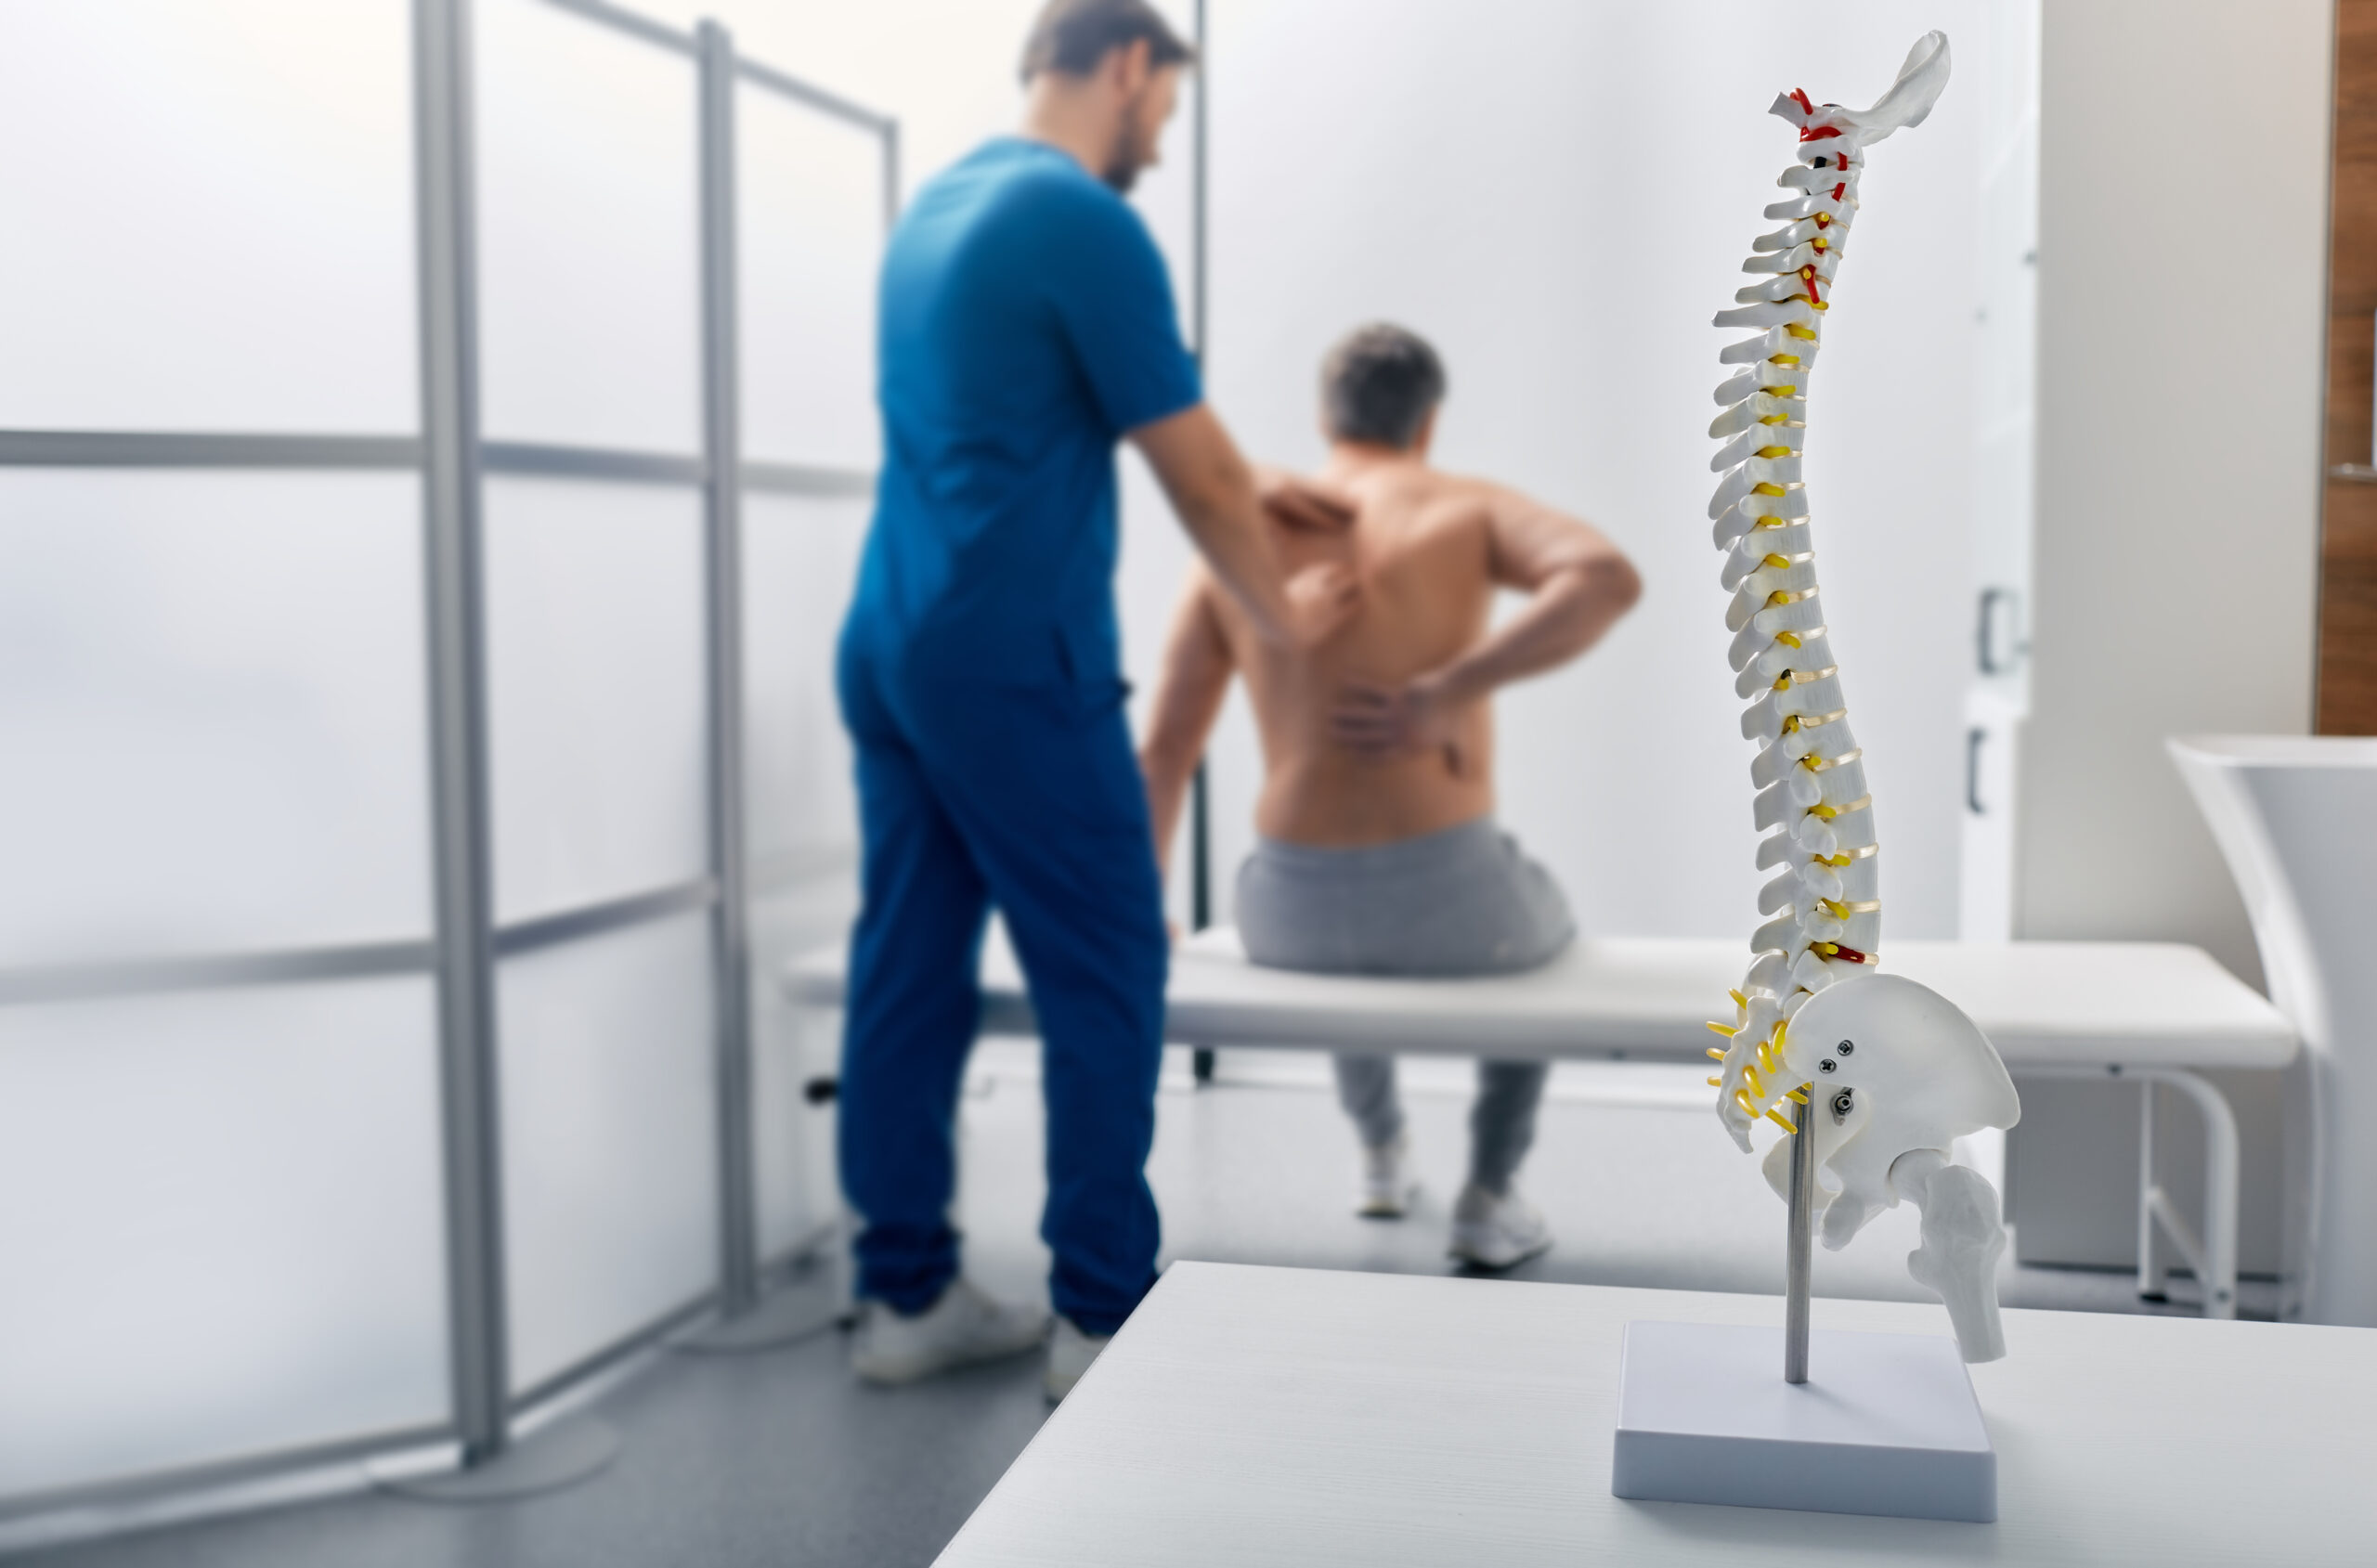 Anatomical model of spine on table in manual therapist's office. Adult man patient during spinal exam by physiotherapist on background, soft focus